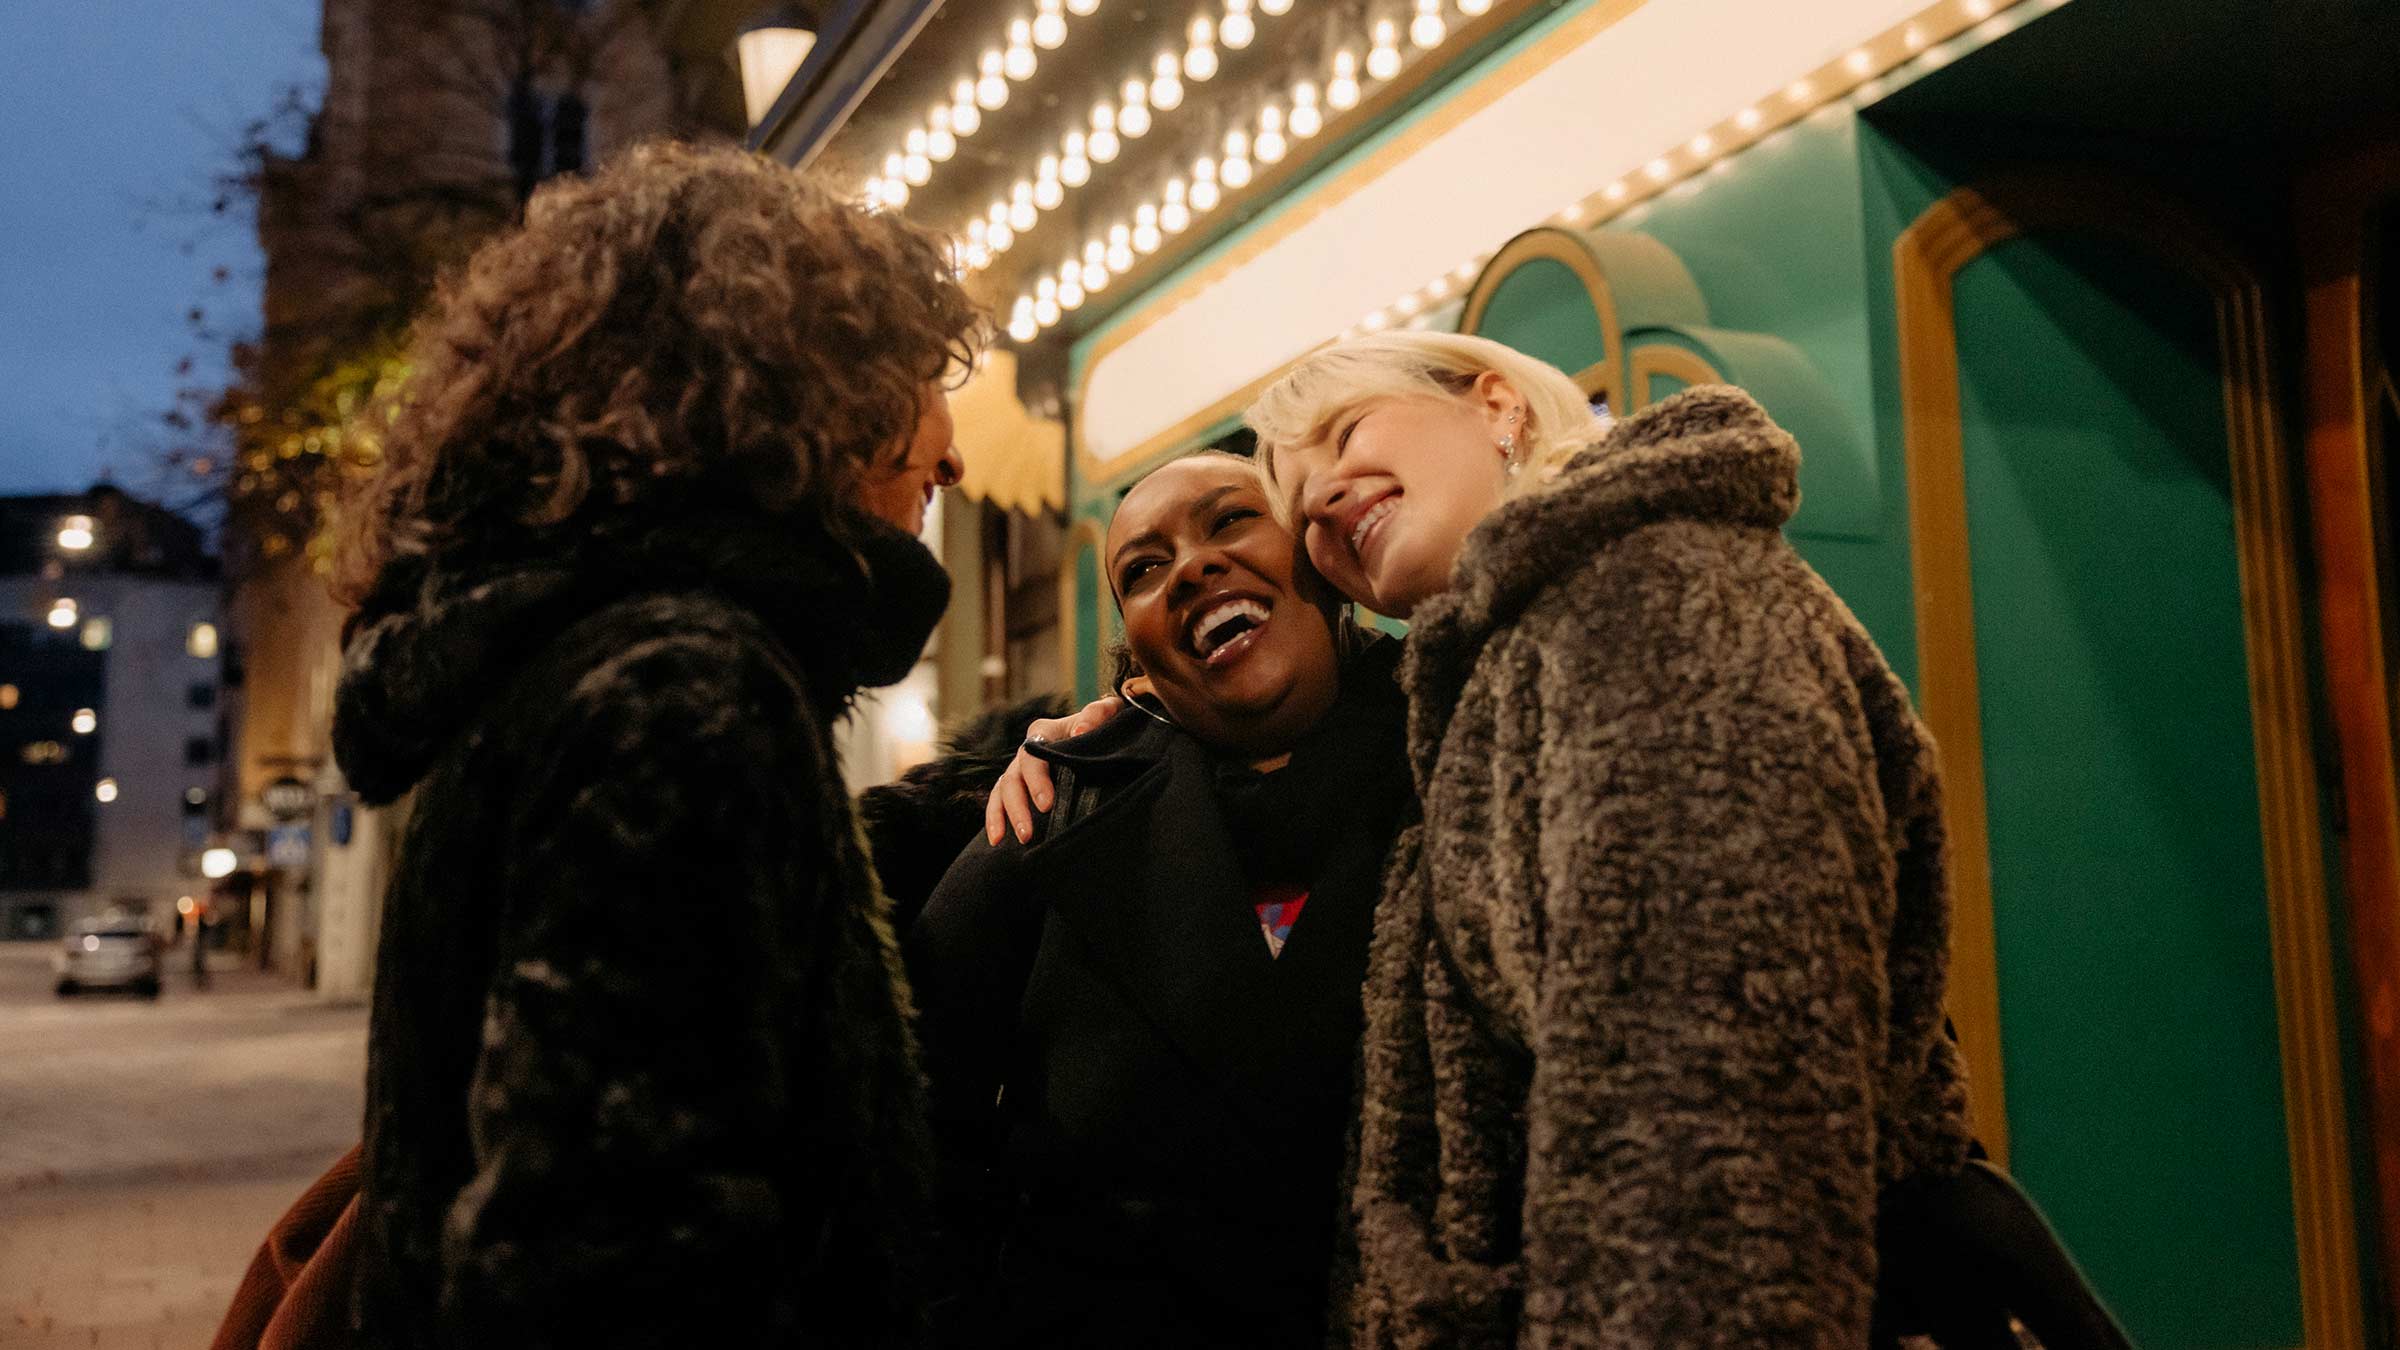 Three female friends hugging outside a theater